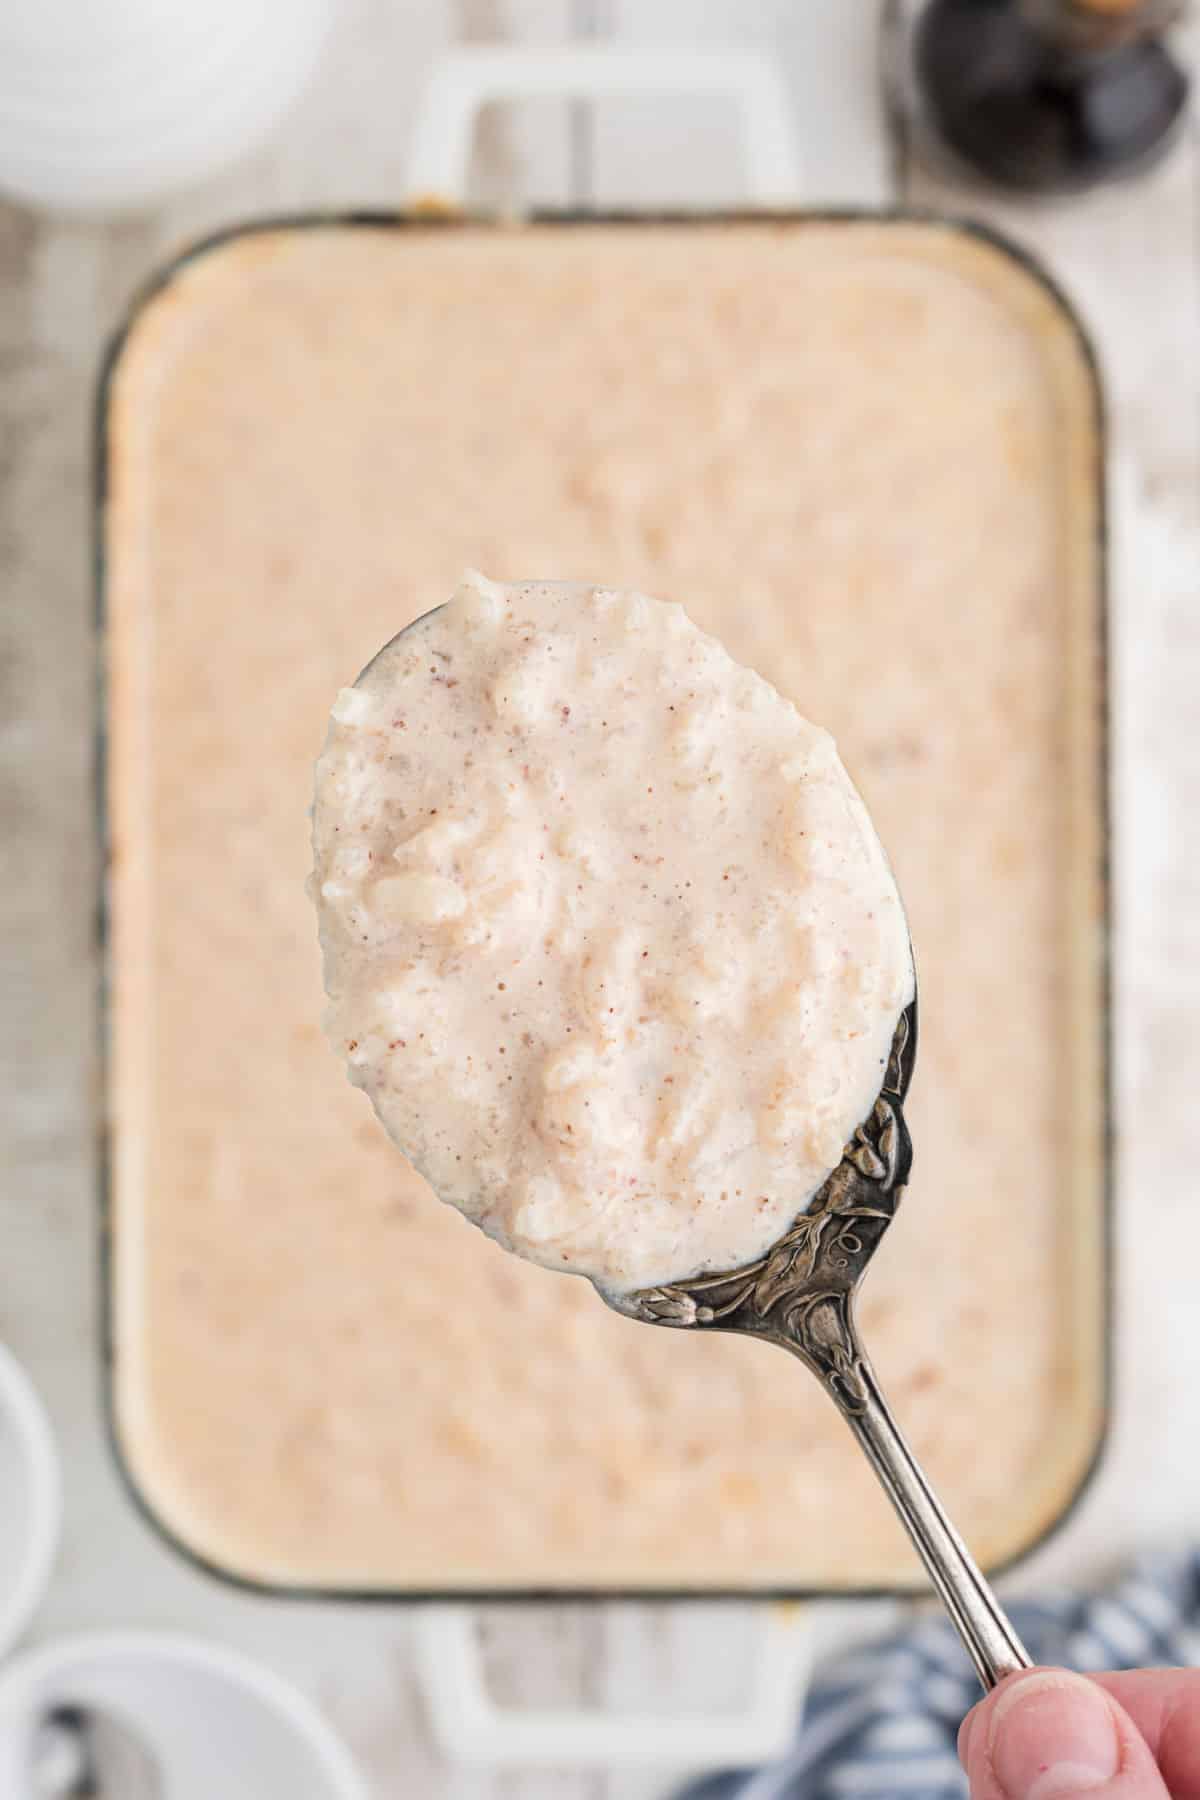 A spoon being lifted out of a pan full of rice pudding with evaporated milk.